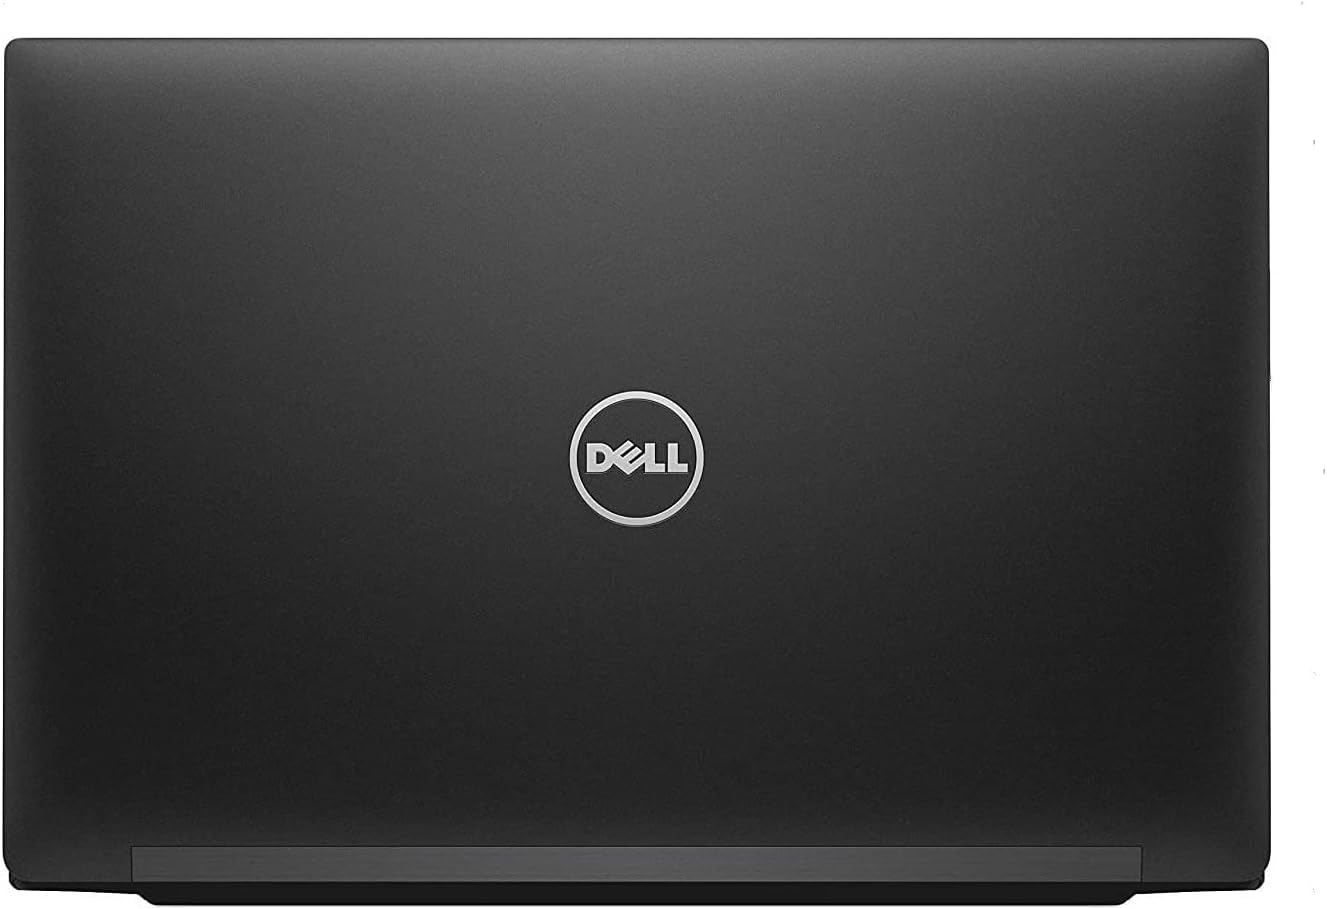 Dell Latitude 7490 | Intel i5 6th Generation | 8gb Ram | 256gb SSD With Charger